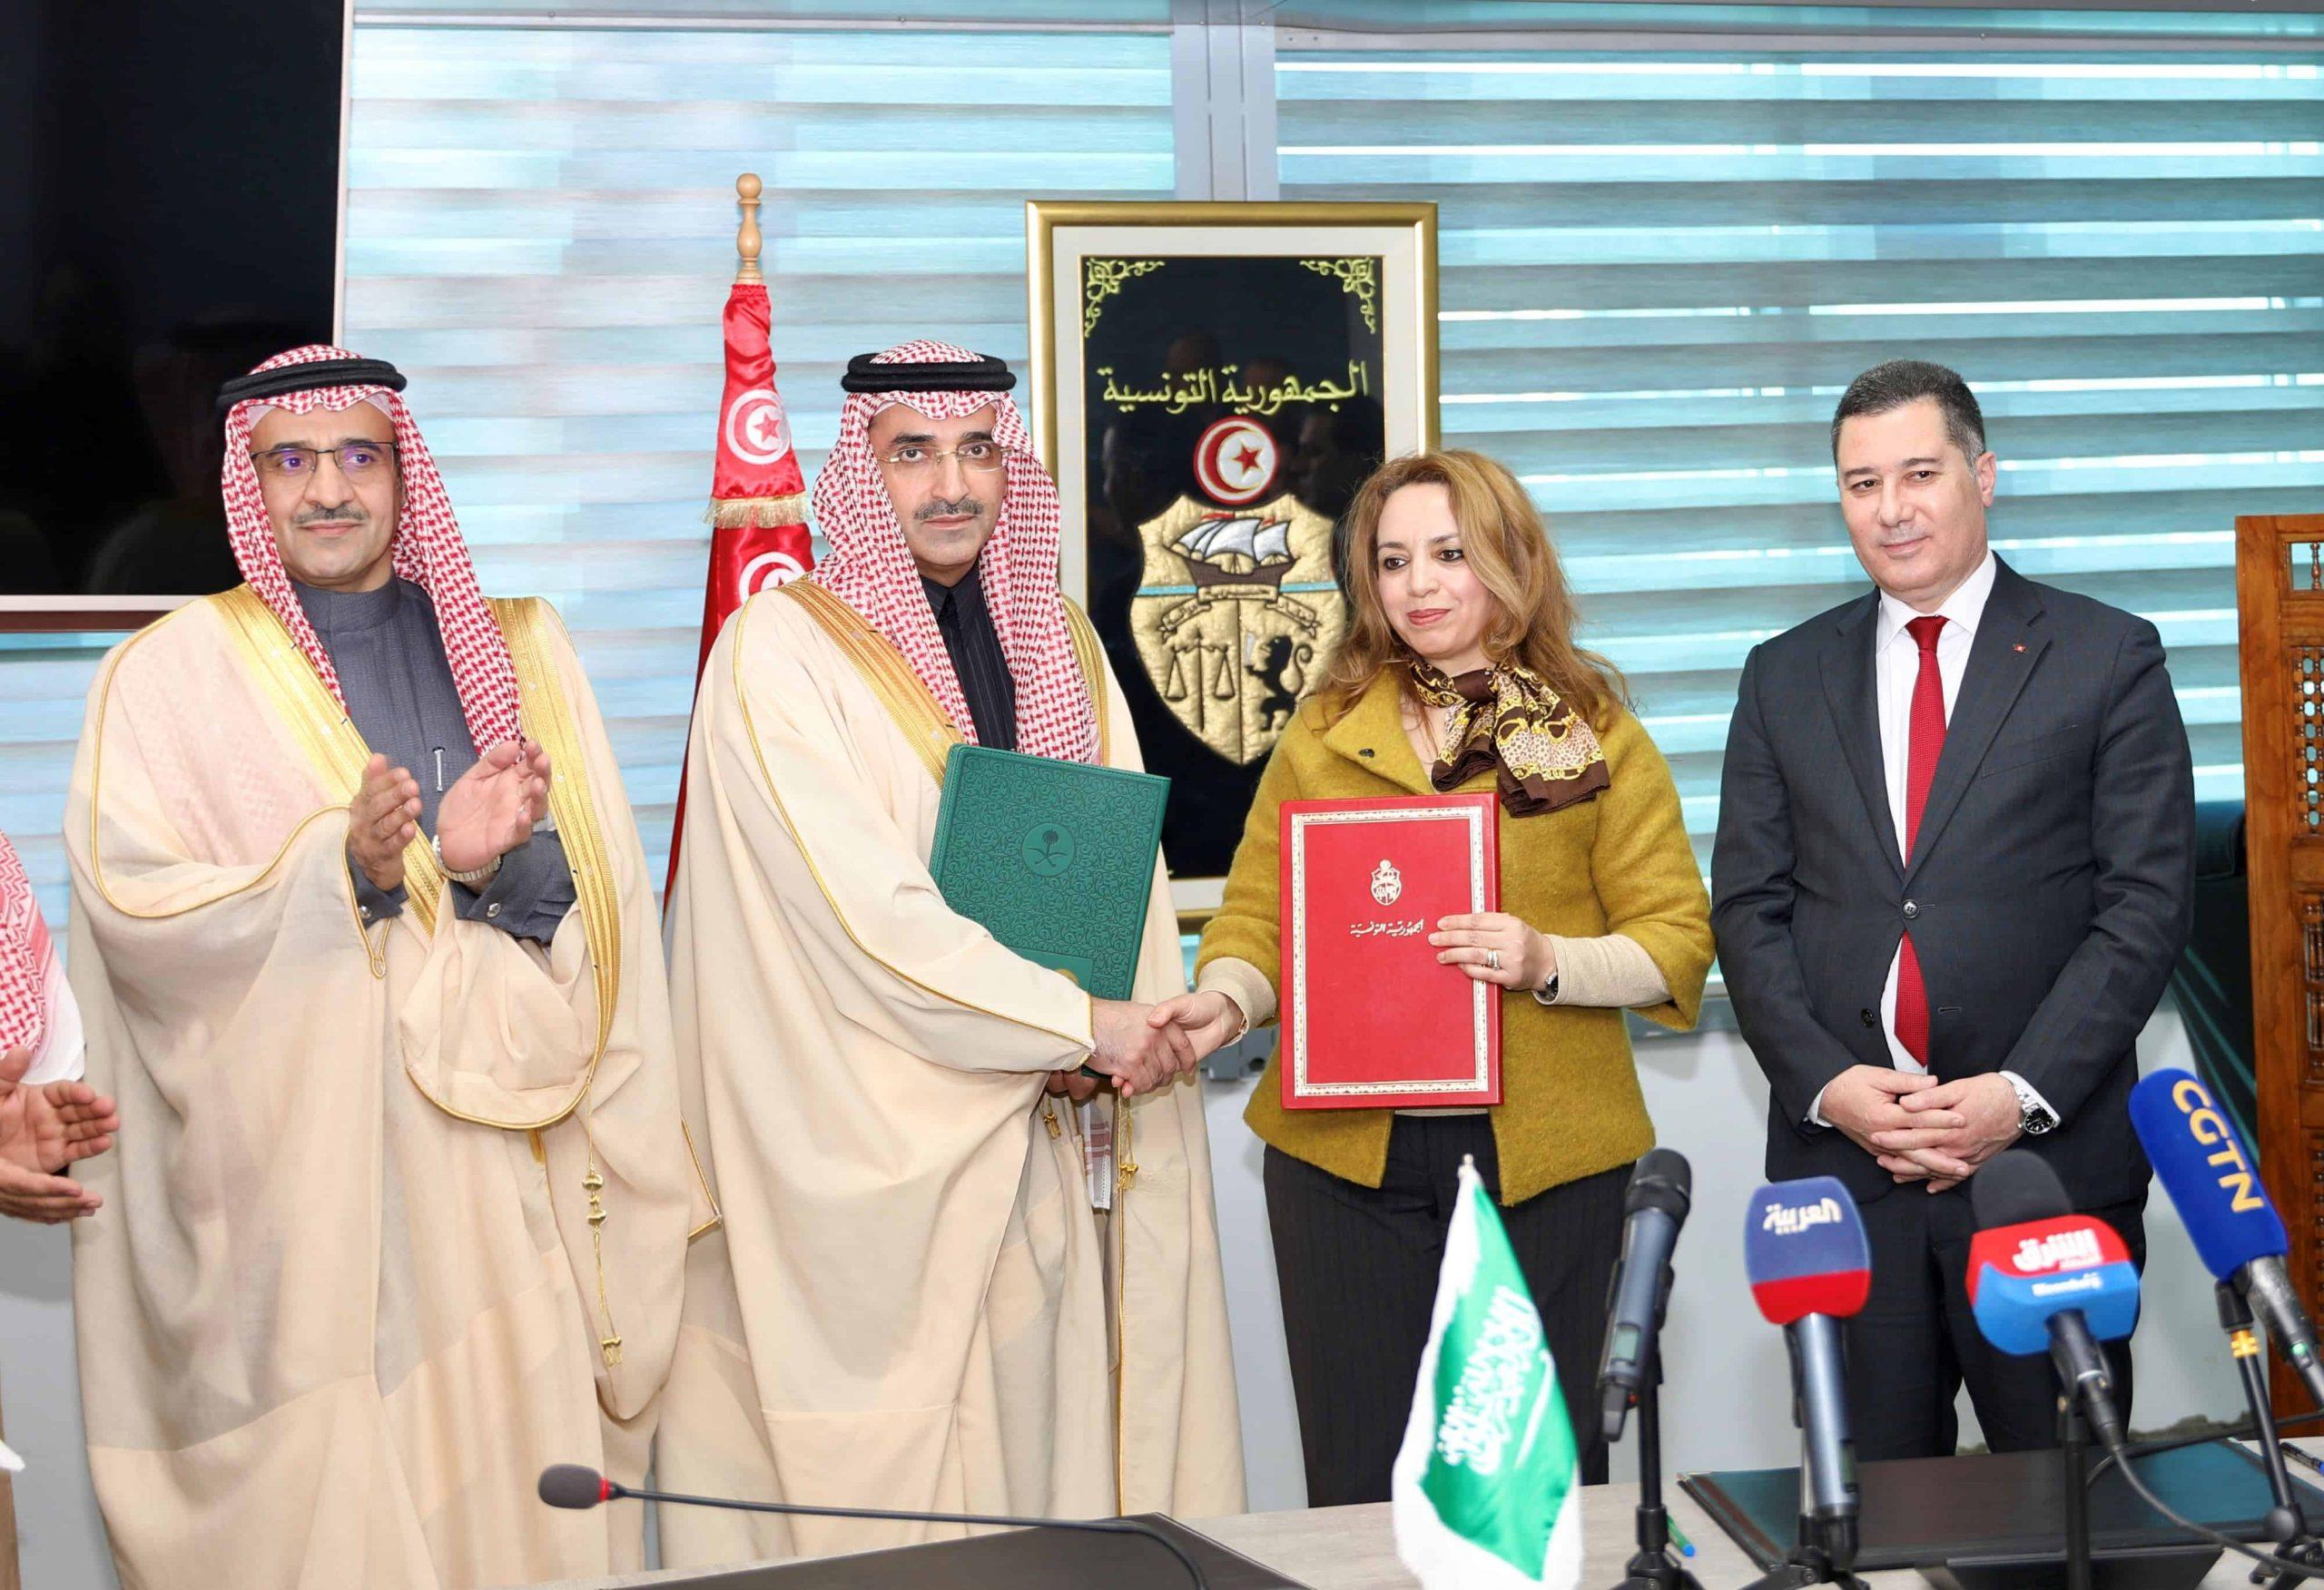 Saudi Fund For Development Signs A New Development Loan Agreement To Support The Transport Sector In Tunisia